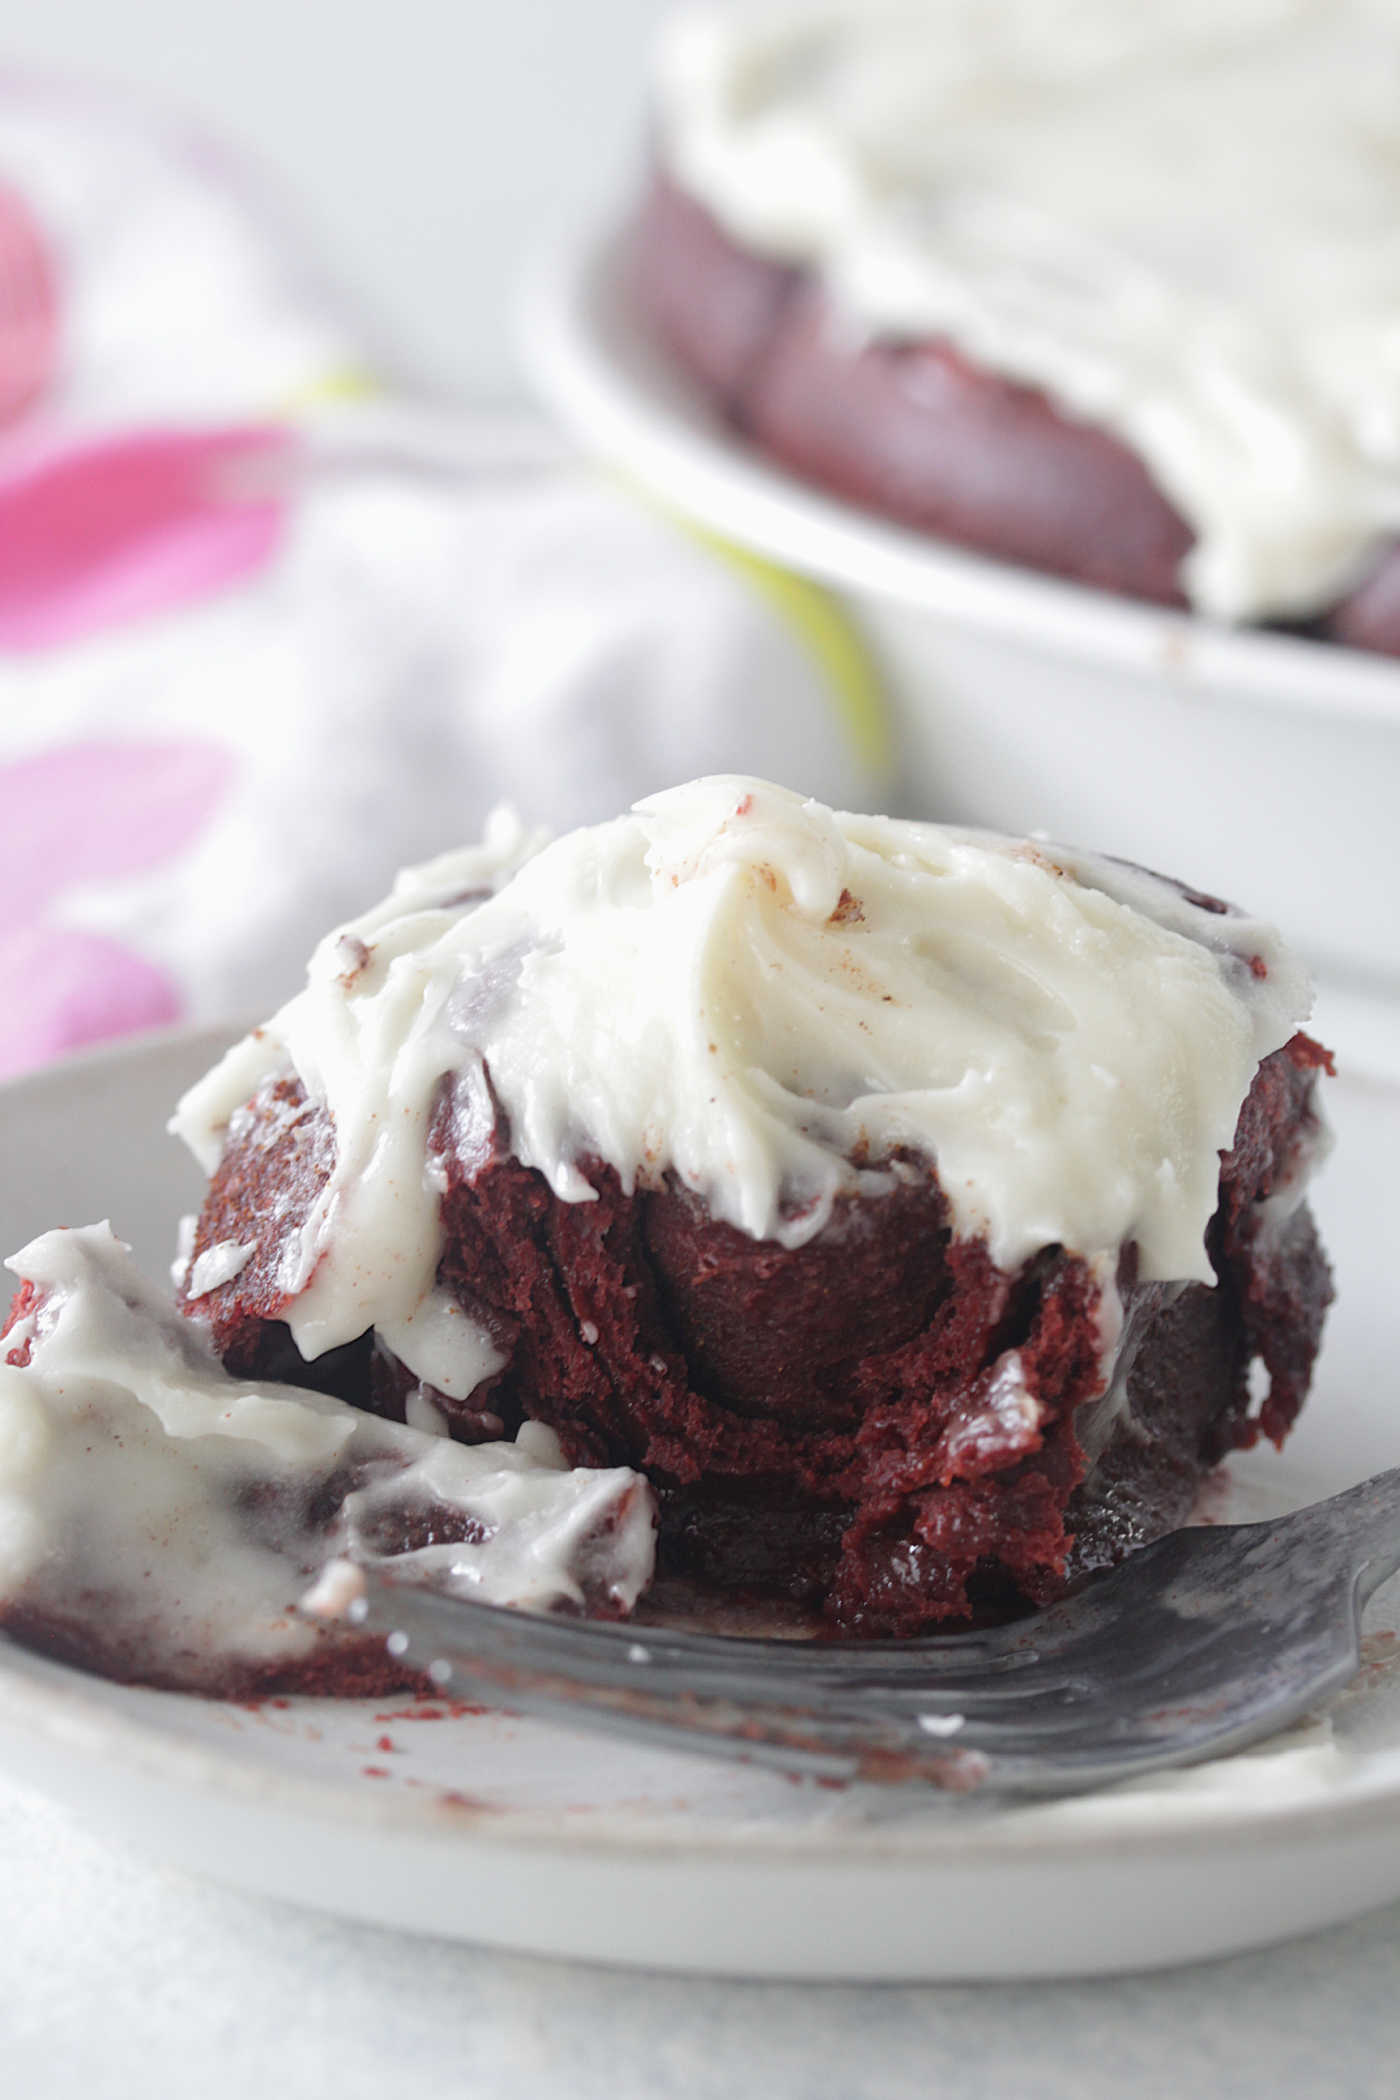 Red Velvet Cinnamon Roll on a plate broken with a fork